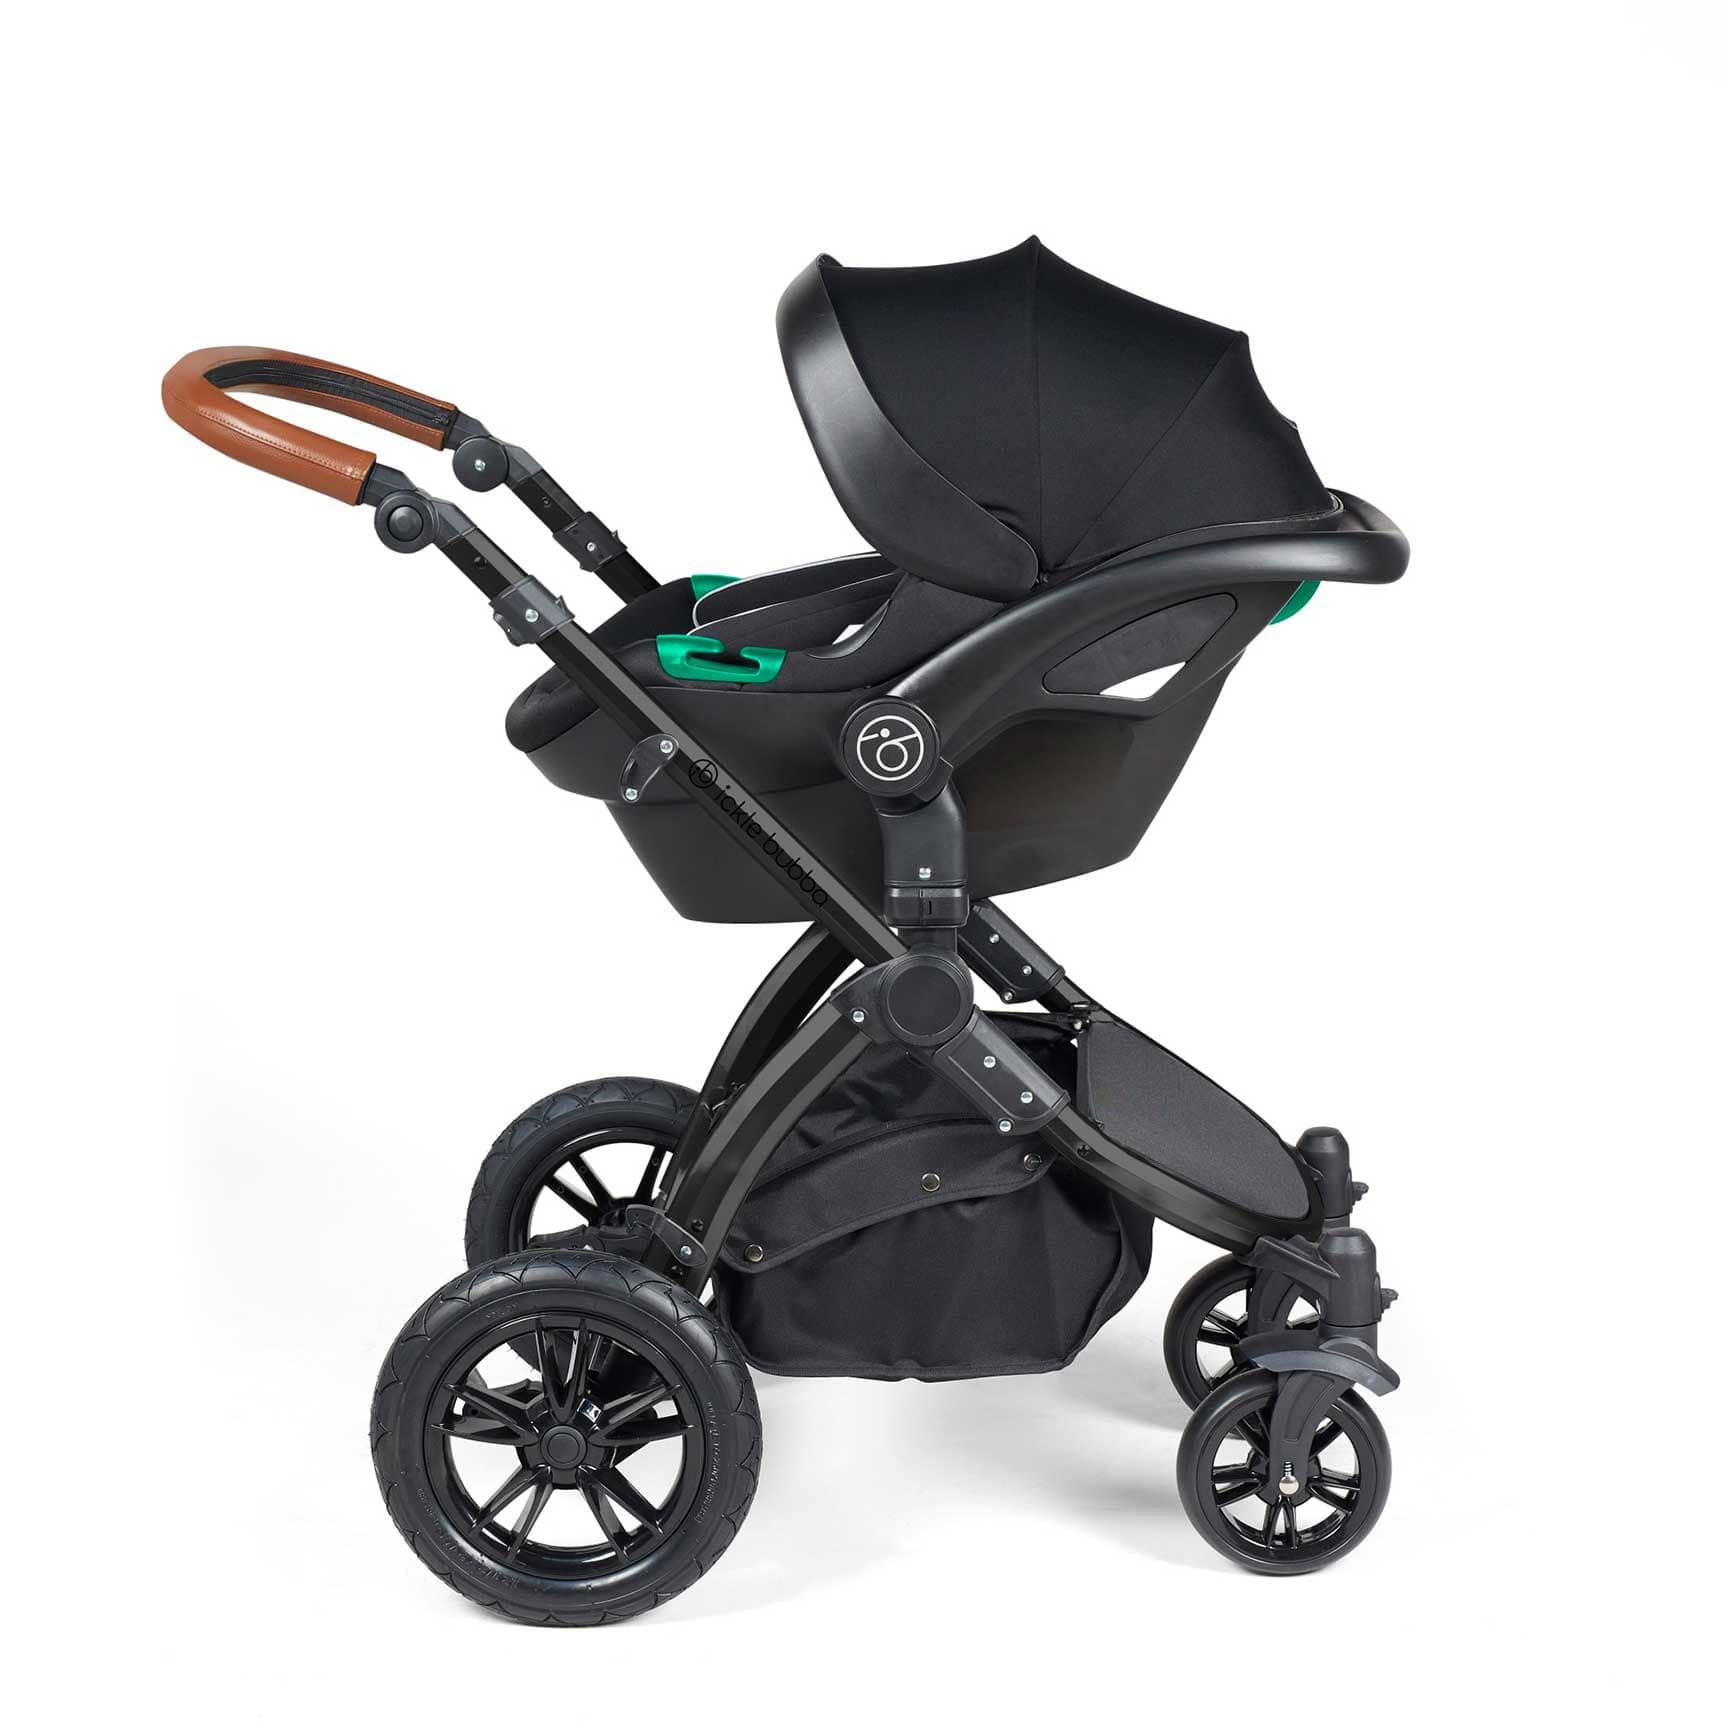 Ickle Bubba Stomp Luxe All-in-One Travel System with Isofix Base in Black/Charcoal Grey/Tan Travel Systems 10-011-300-207 5056515026443